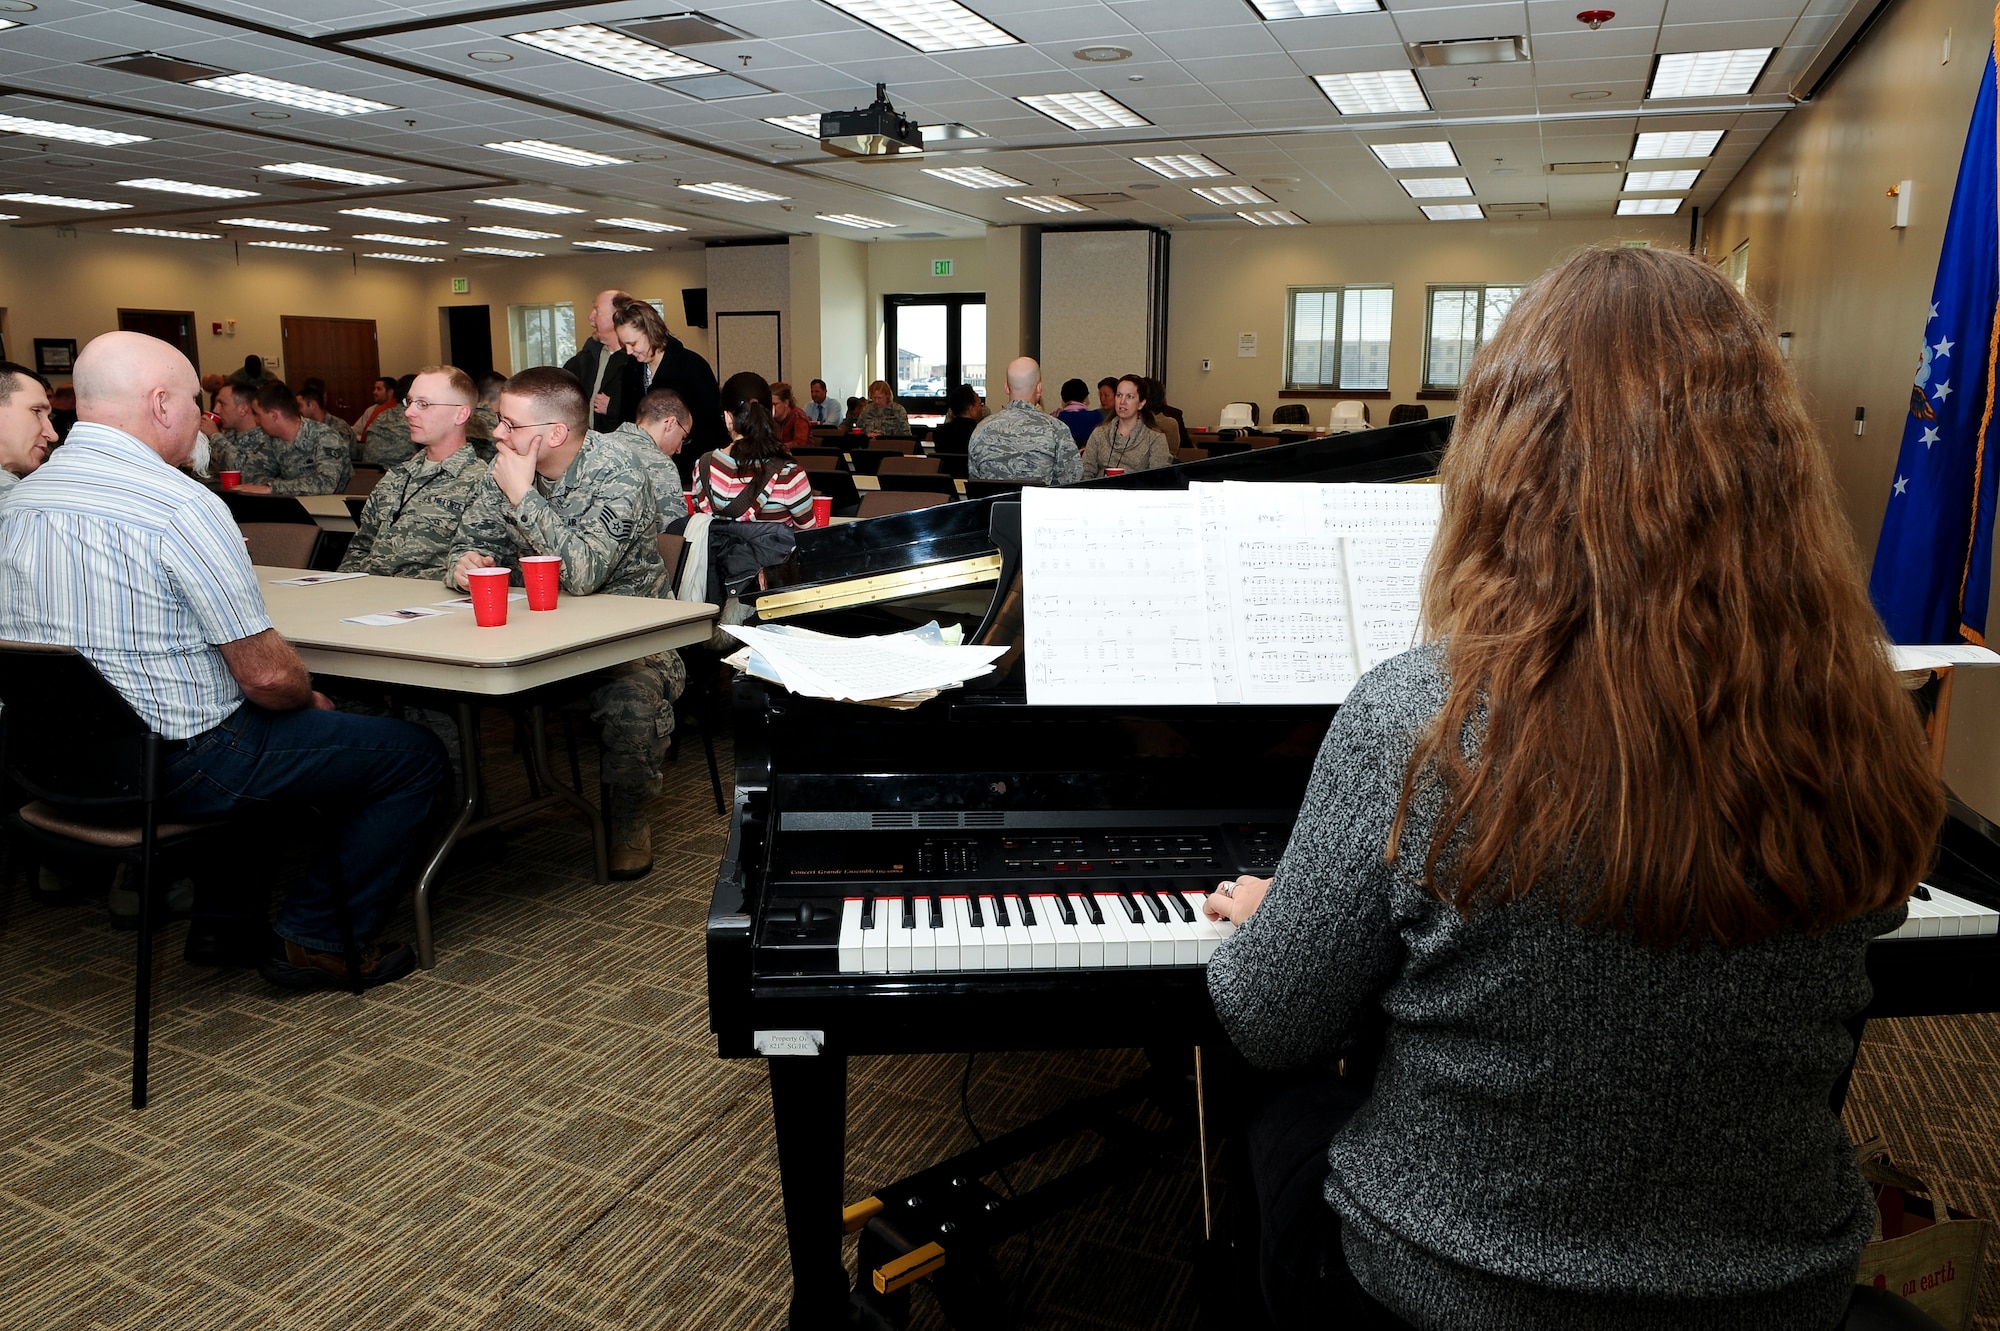 Katie Steinke, Buckley Chapel catholic community music director, plays the piano as members of Team Buckley prepare for the annual National Prayer Luncheon Feb. 5, 2014, at the chapel on Buckley Air Force Base, Colo. More than 350 Team Buckley members attended the luncheon, an annual event that encourages believers of any religion to seek their God through prayer. (U.S. Air Force photo by Senior Airman Phillip Houk/Released)